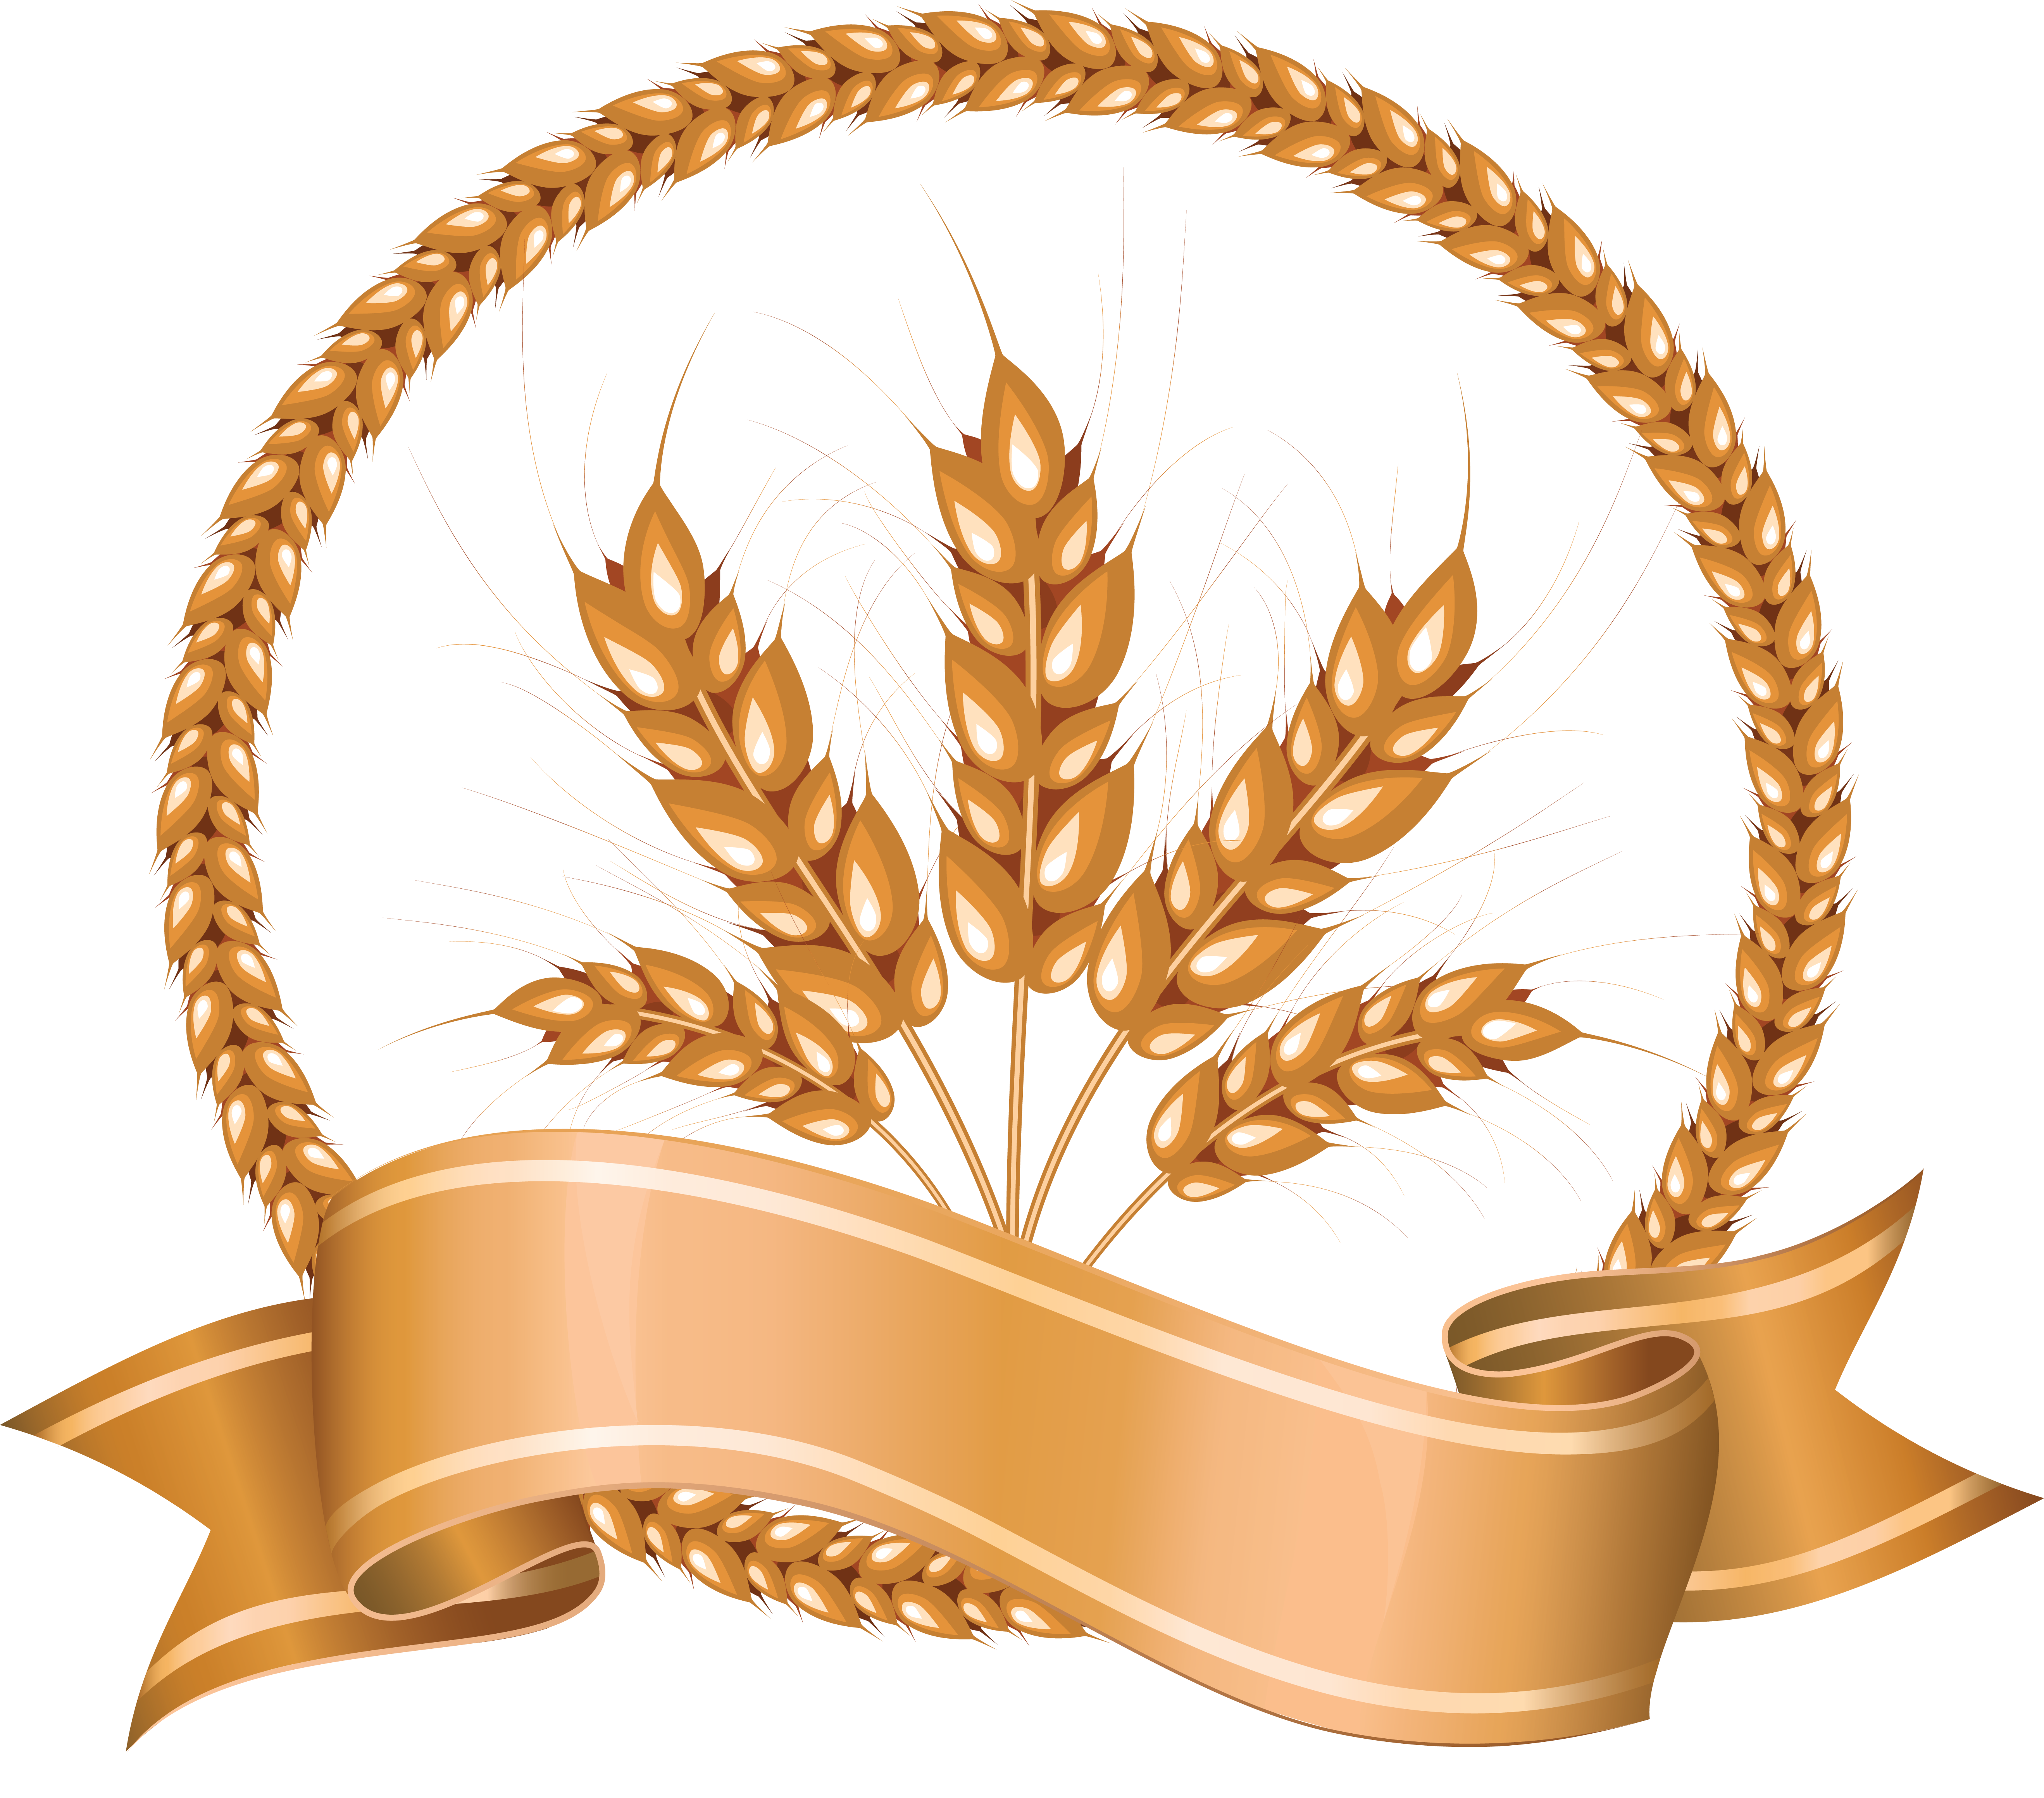 Grains clipart protein. Wheat png images free